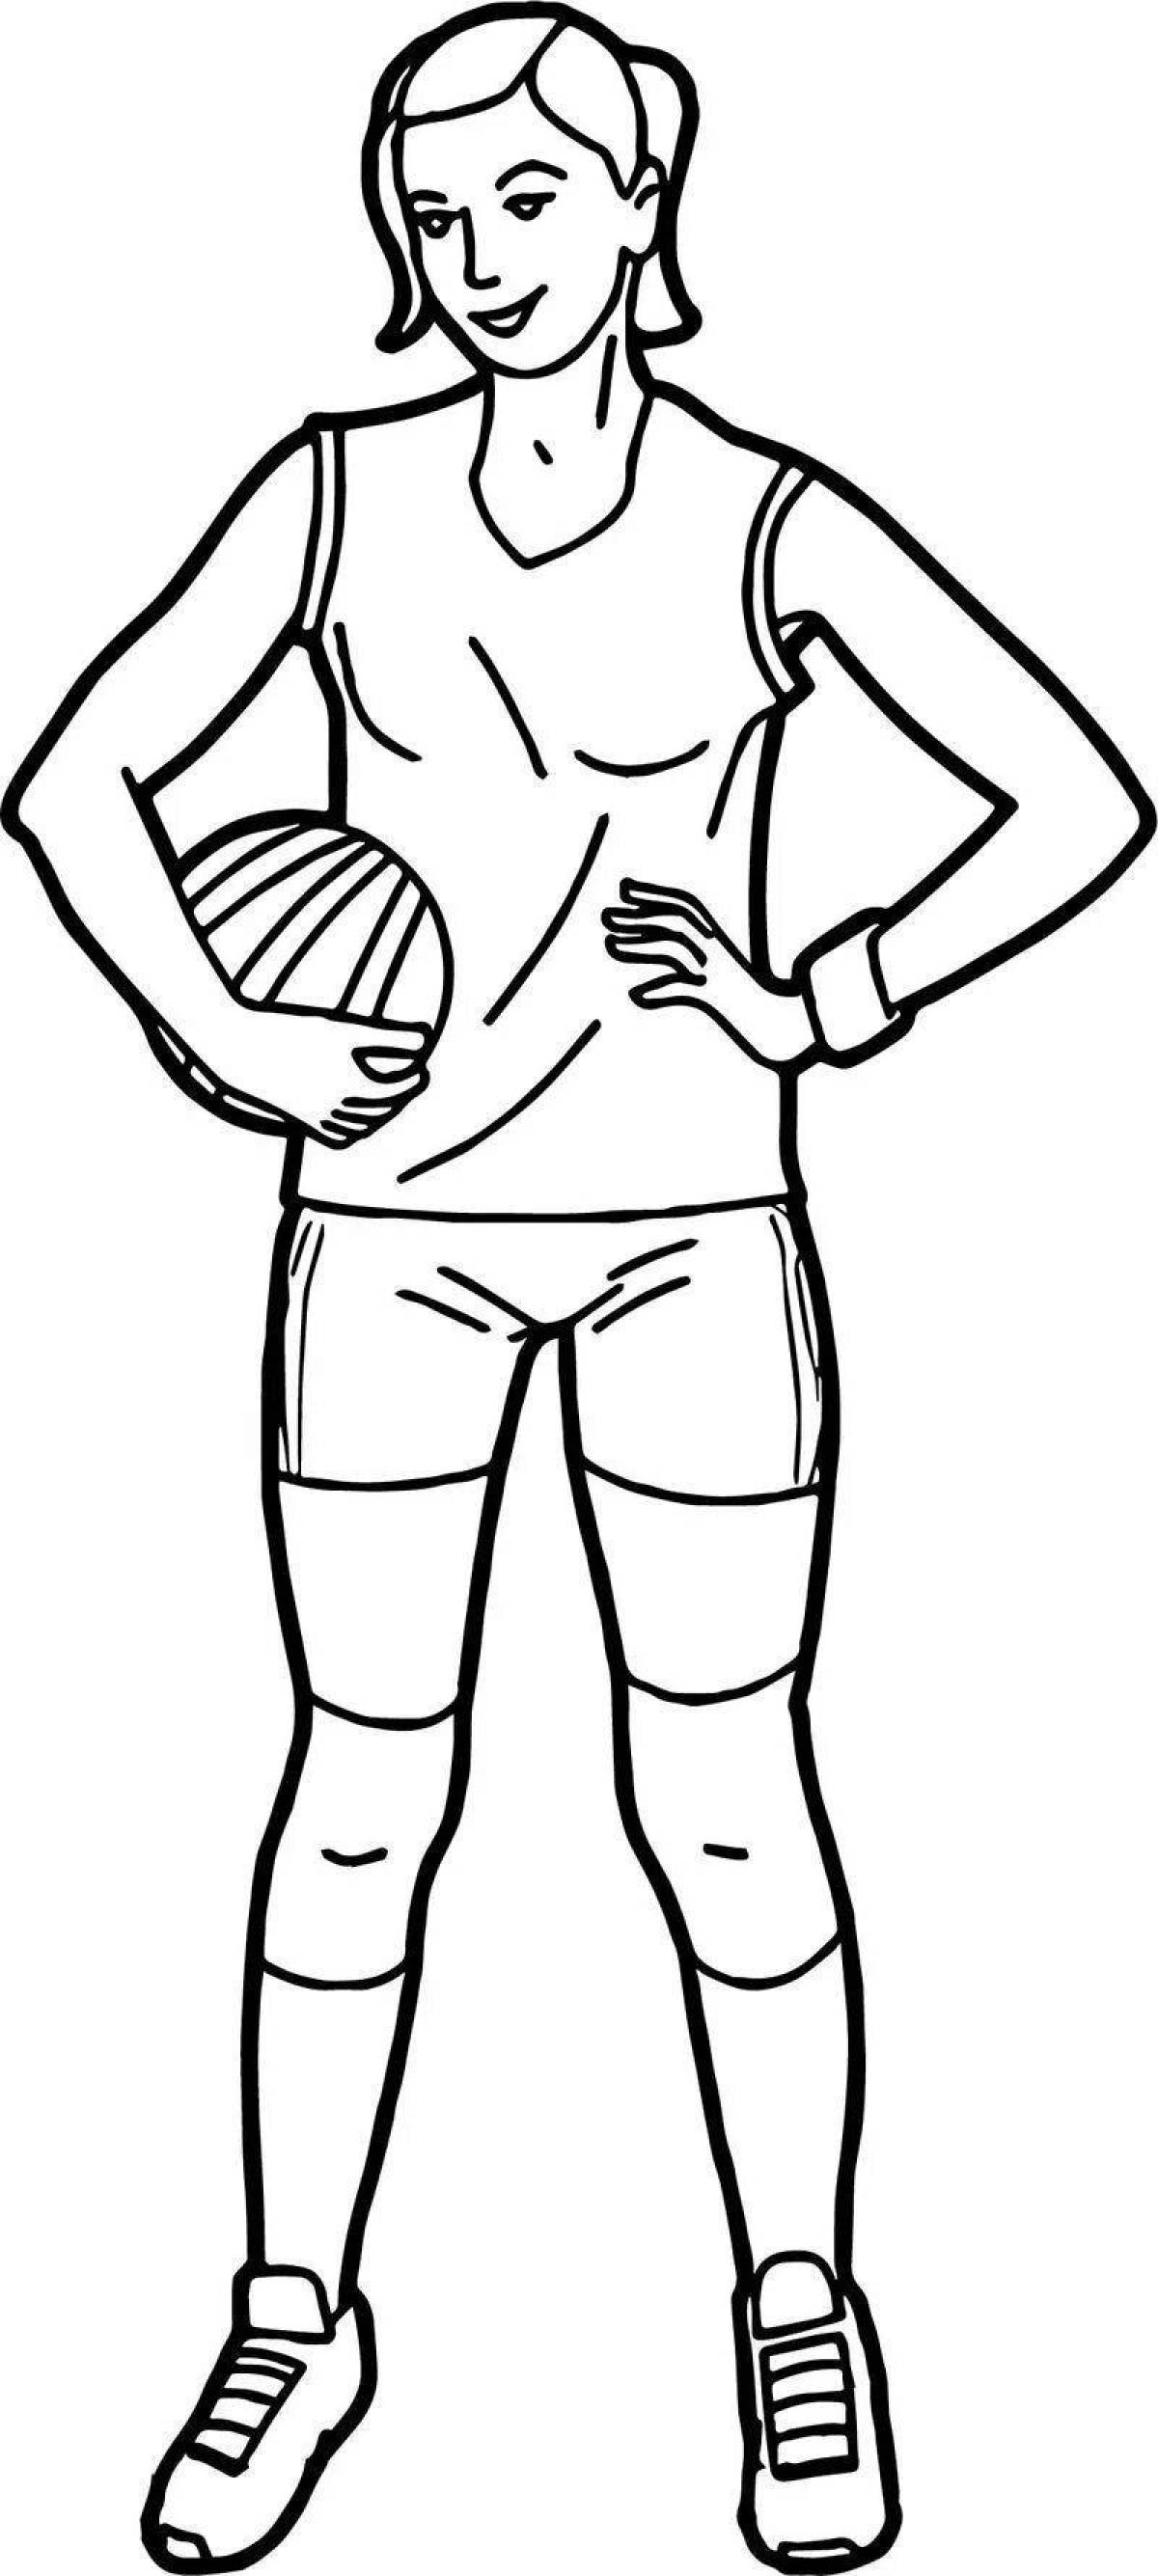 Fairy sportswear coloring page